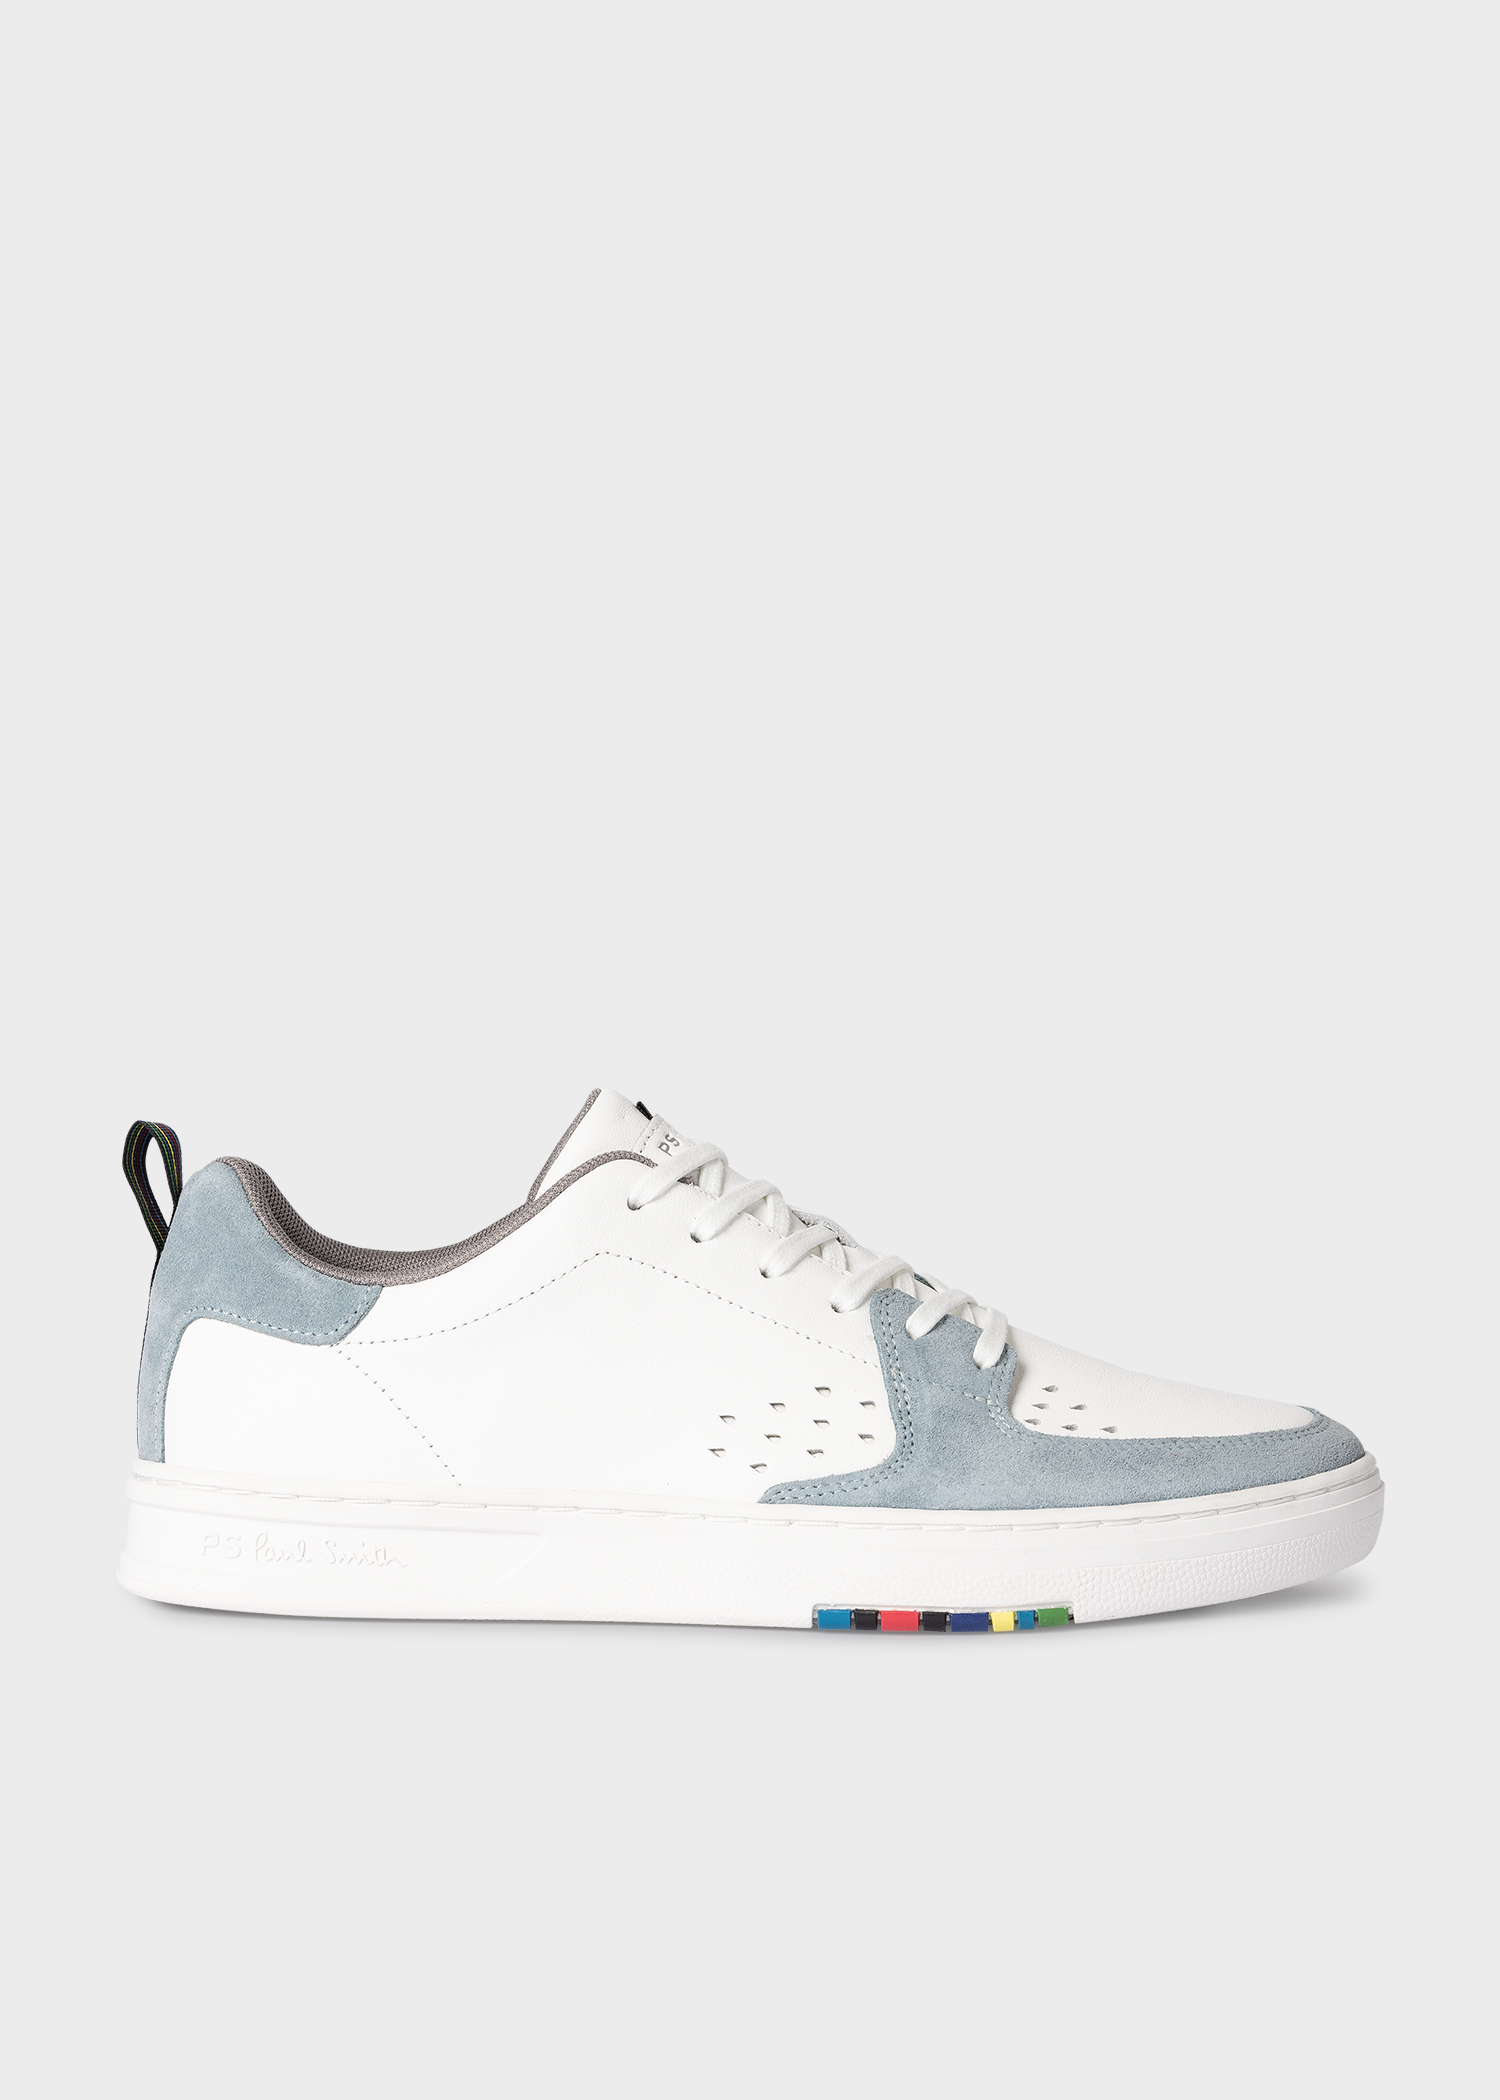 Men's White and Light Blue 'Cosmo' Trainers